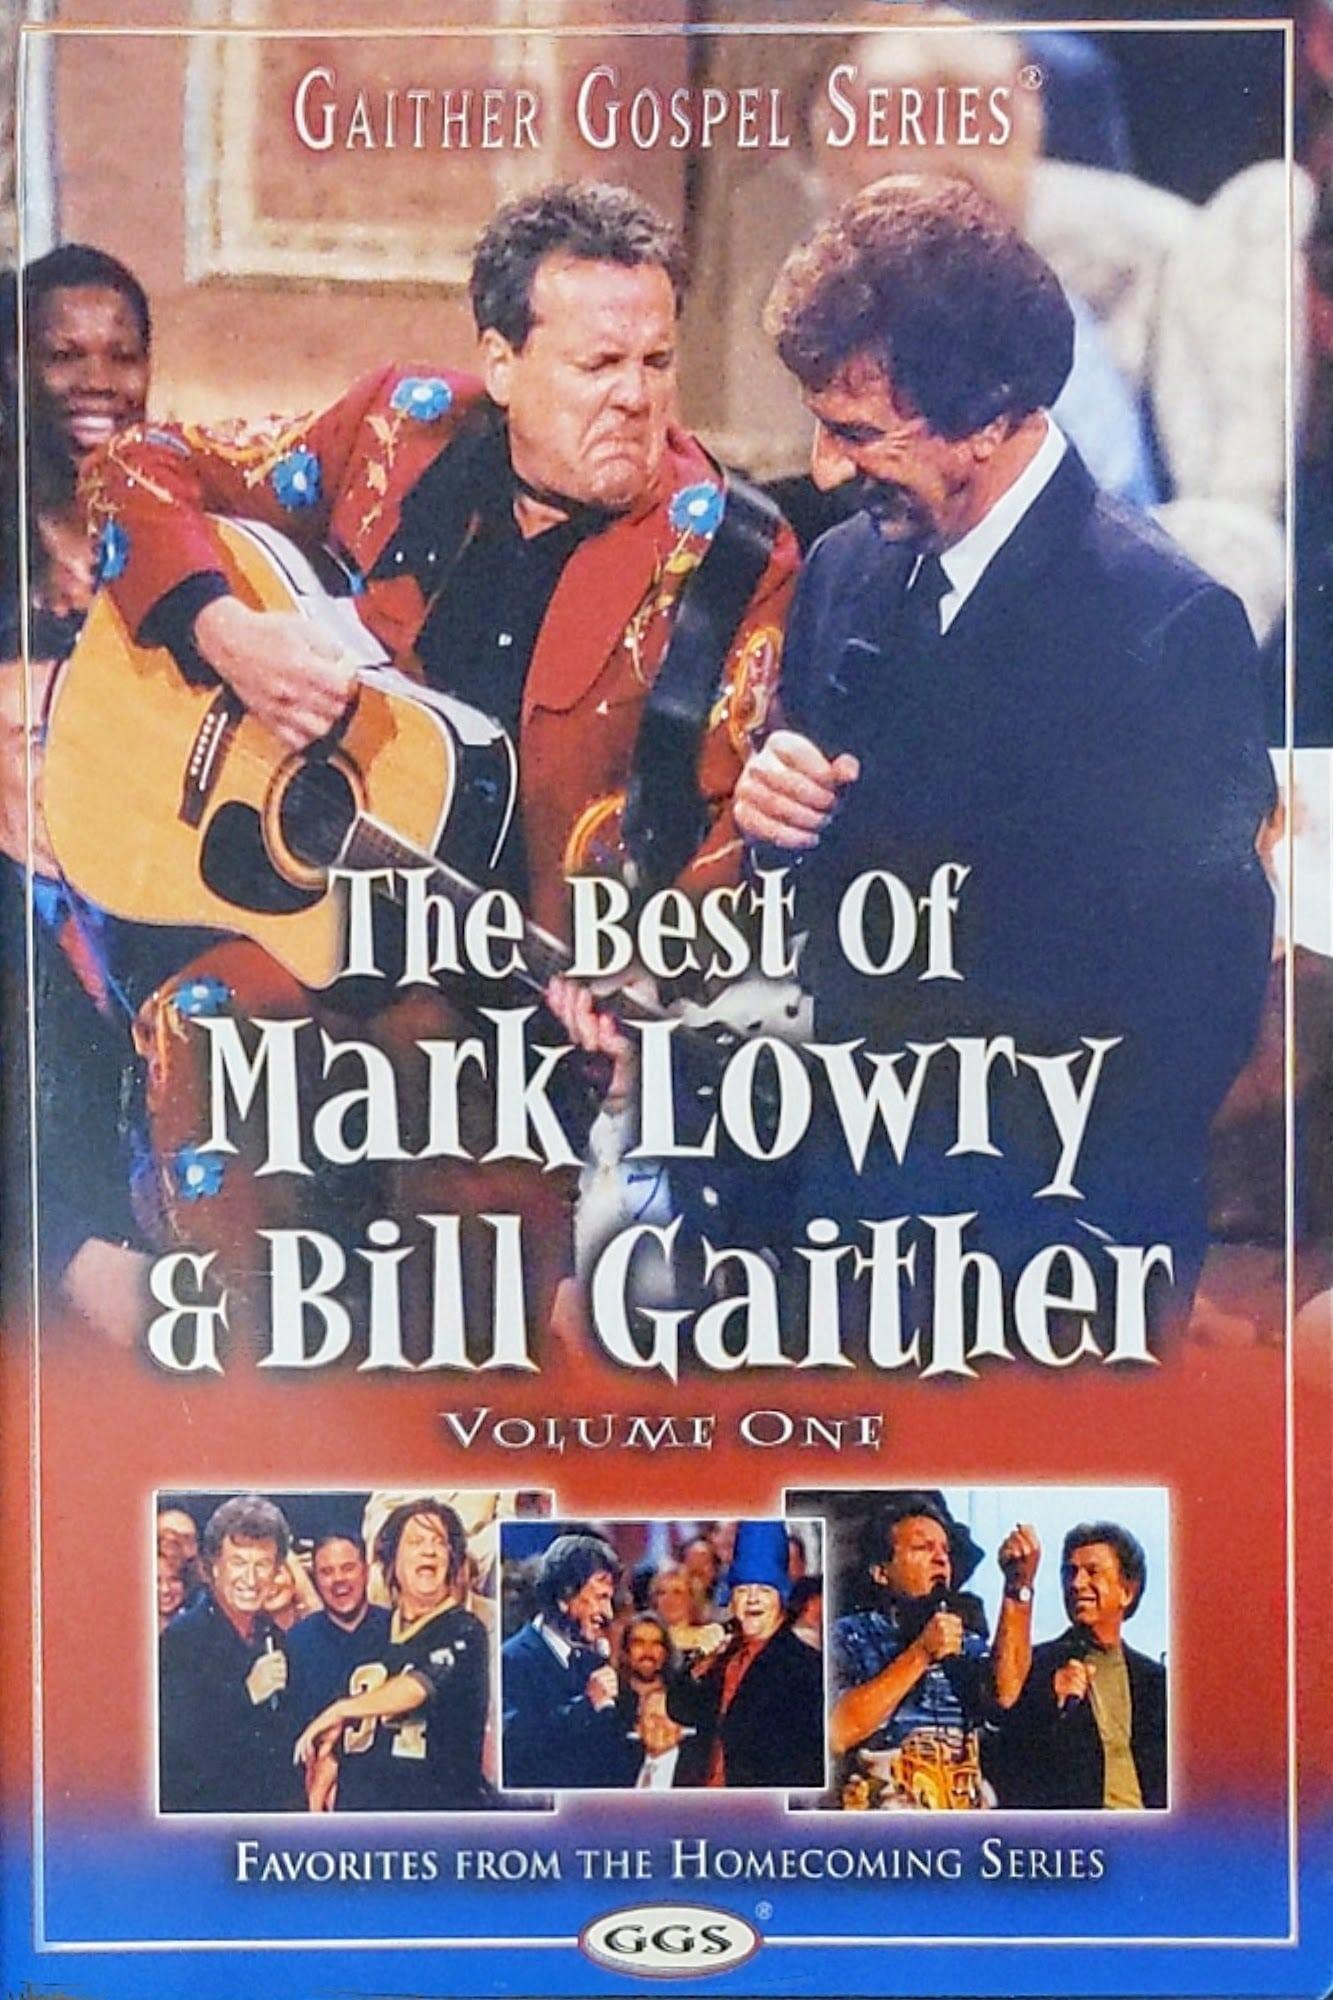 The Best of Mark Lowry & Bill Gaither Volume 1 poster